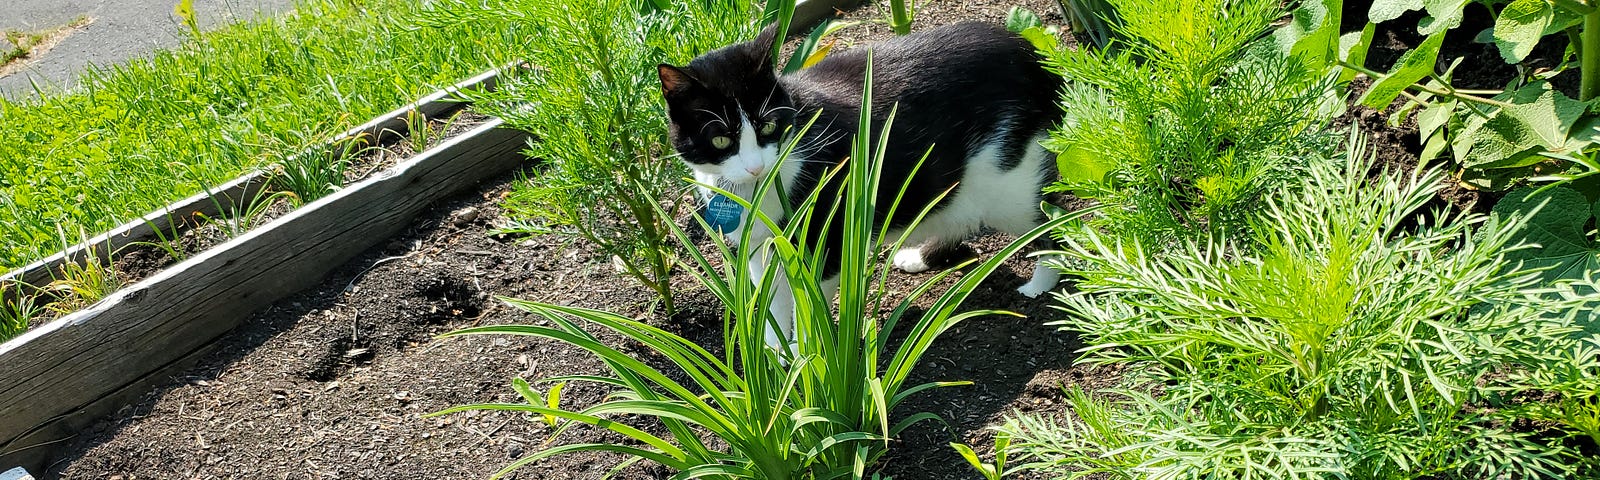 A black and white cat in a raised garden bed filled with assorted plants.